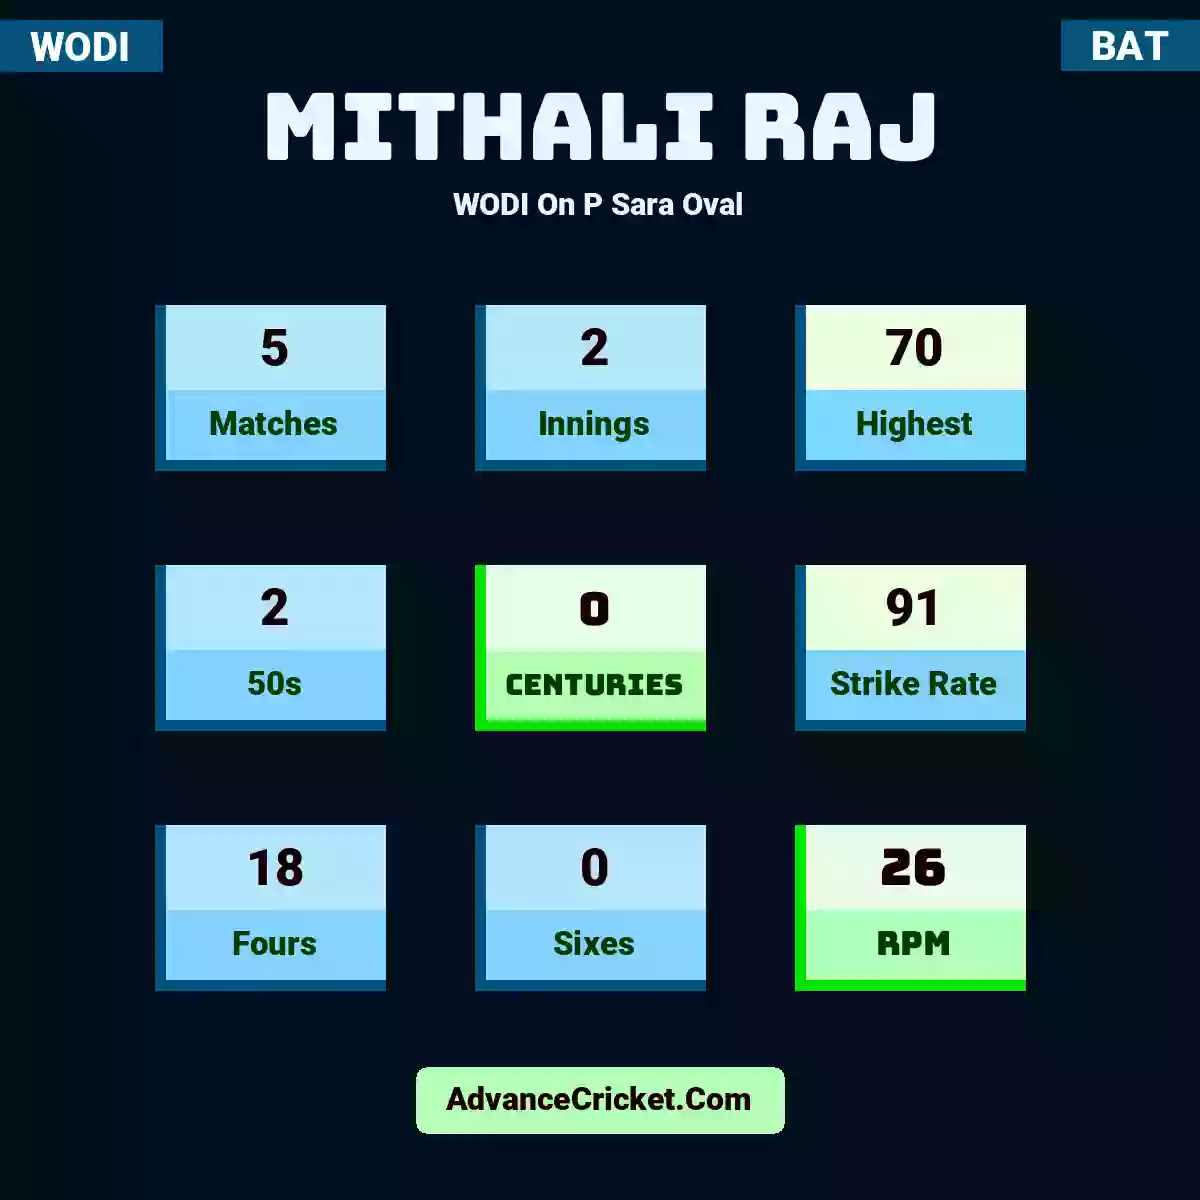 Mithali Raj WODI  On P Sara Oval, Mithali Raj played 5 matches, scored 70 runs as highest, 2 half-centuries, and 0 centuries, with a strike rate of 91. M.Raj hit 18 fours and 0 sixes, with an RPM of 26.